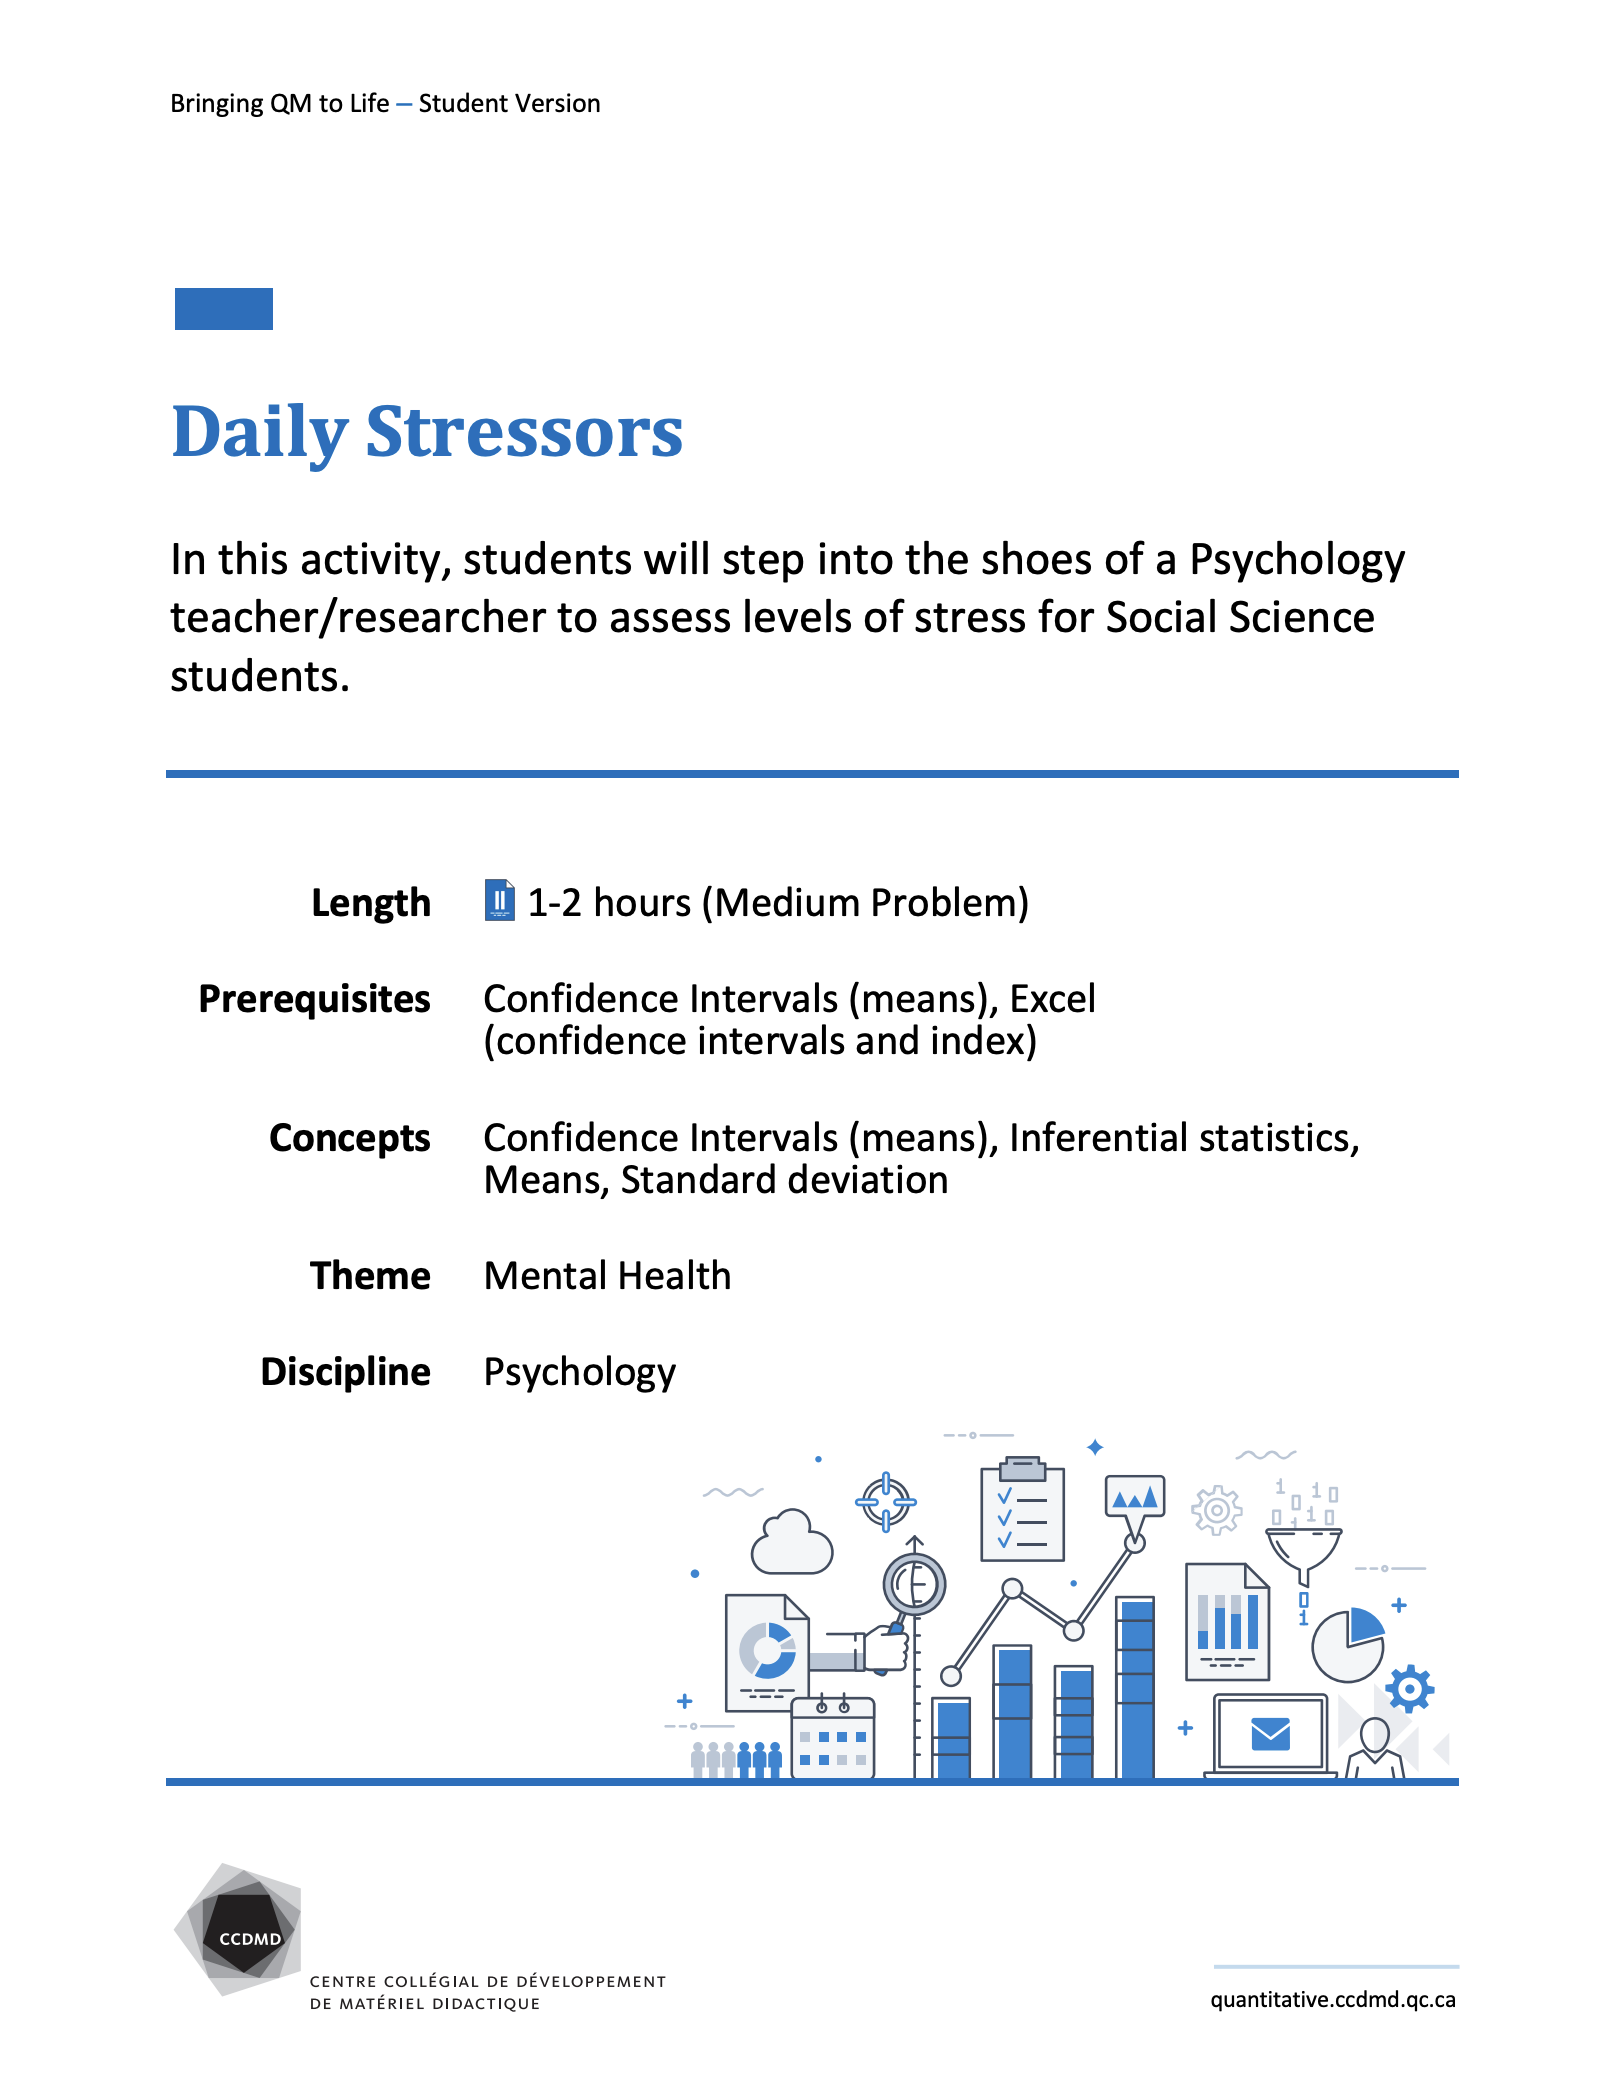 Daily Stressors